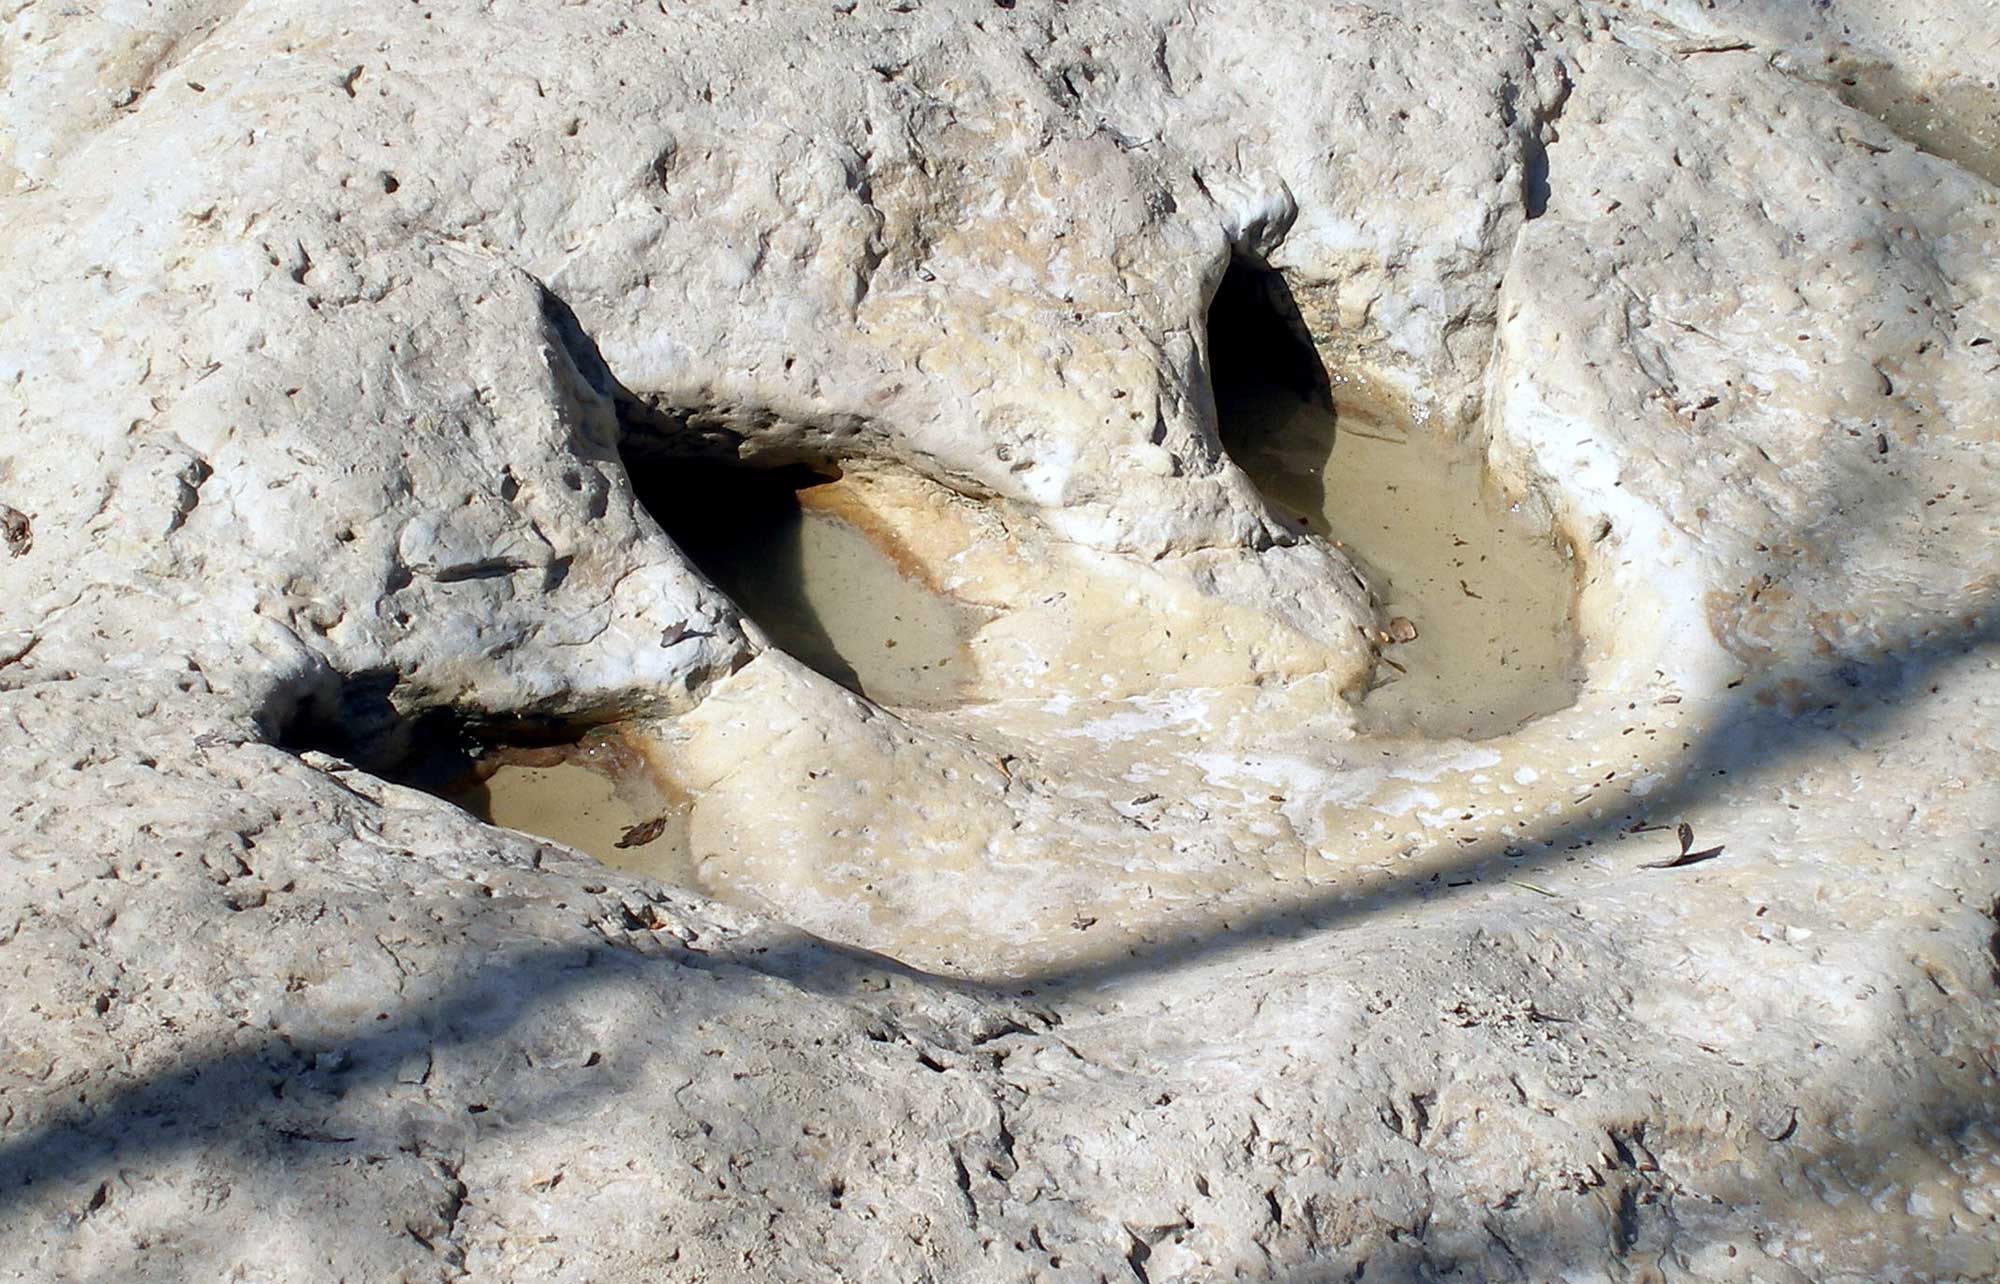 Photograph of a three-toed dinosaur footprint from the Cretaceous of Texas with water in the low areas of the print.